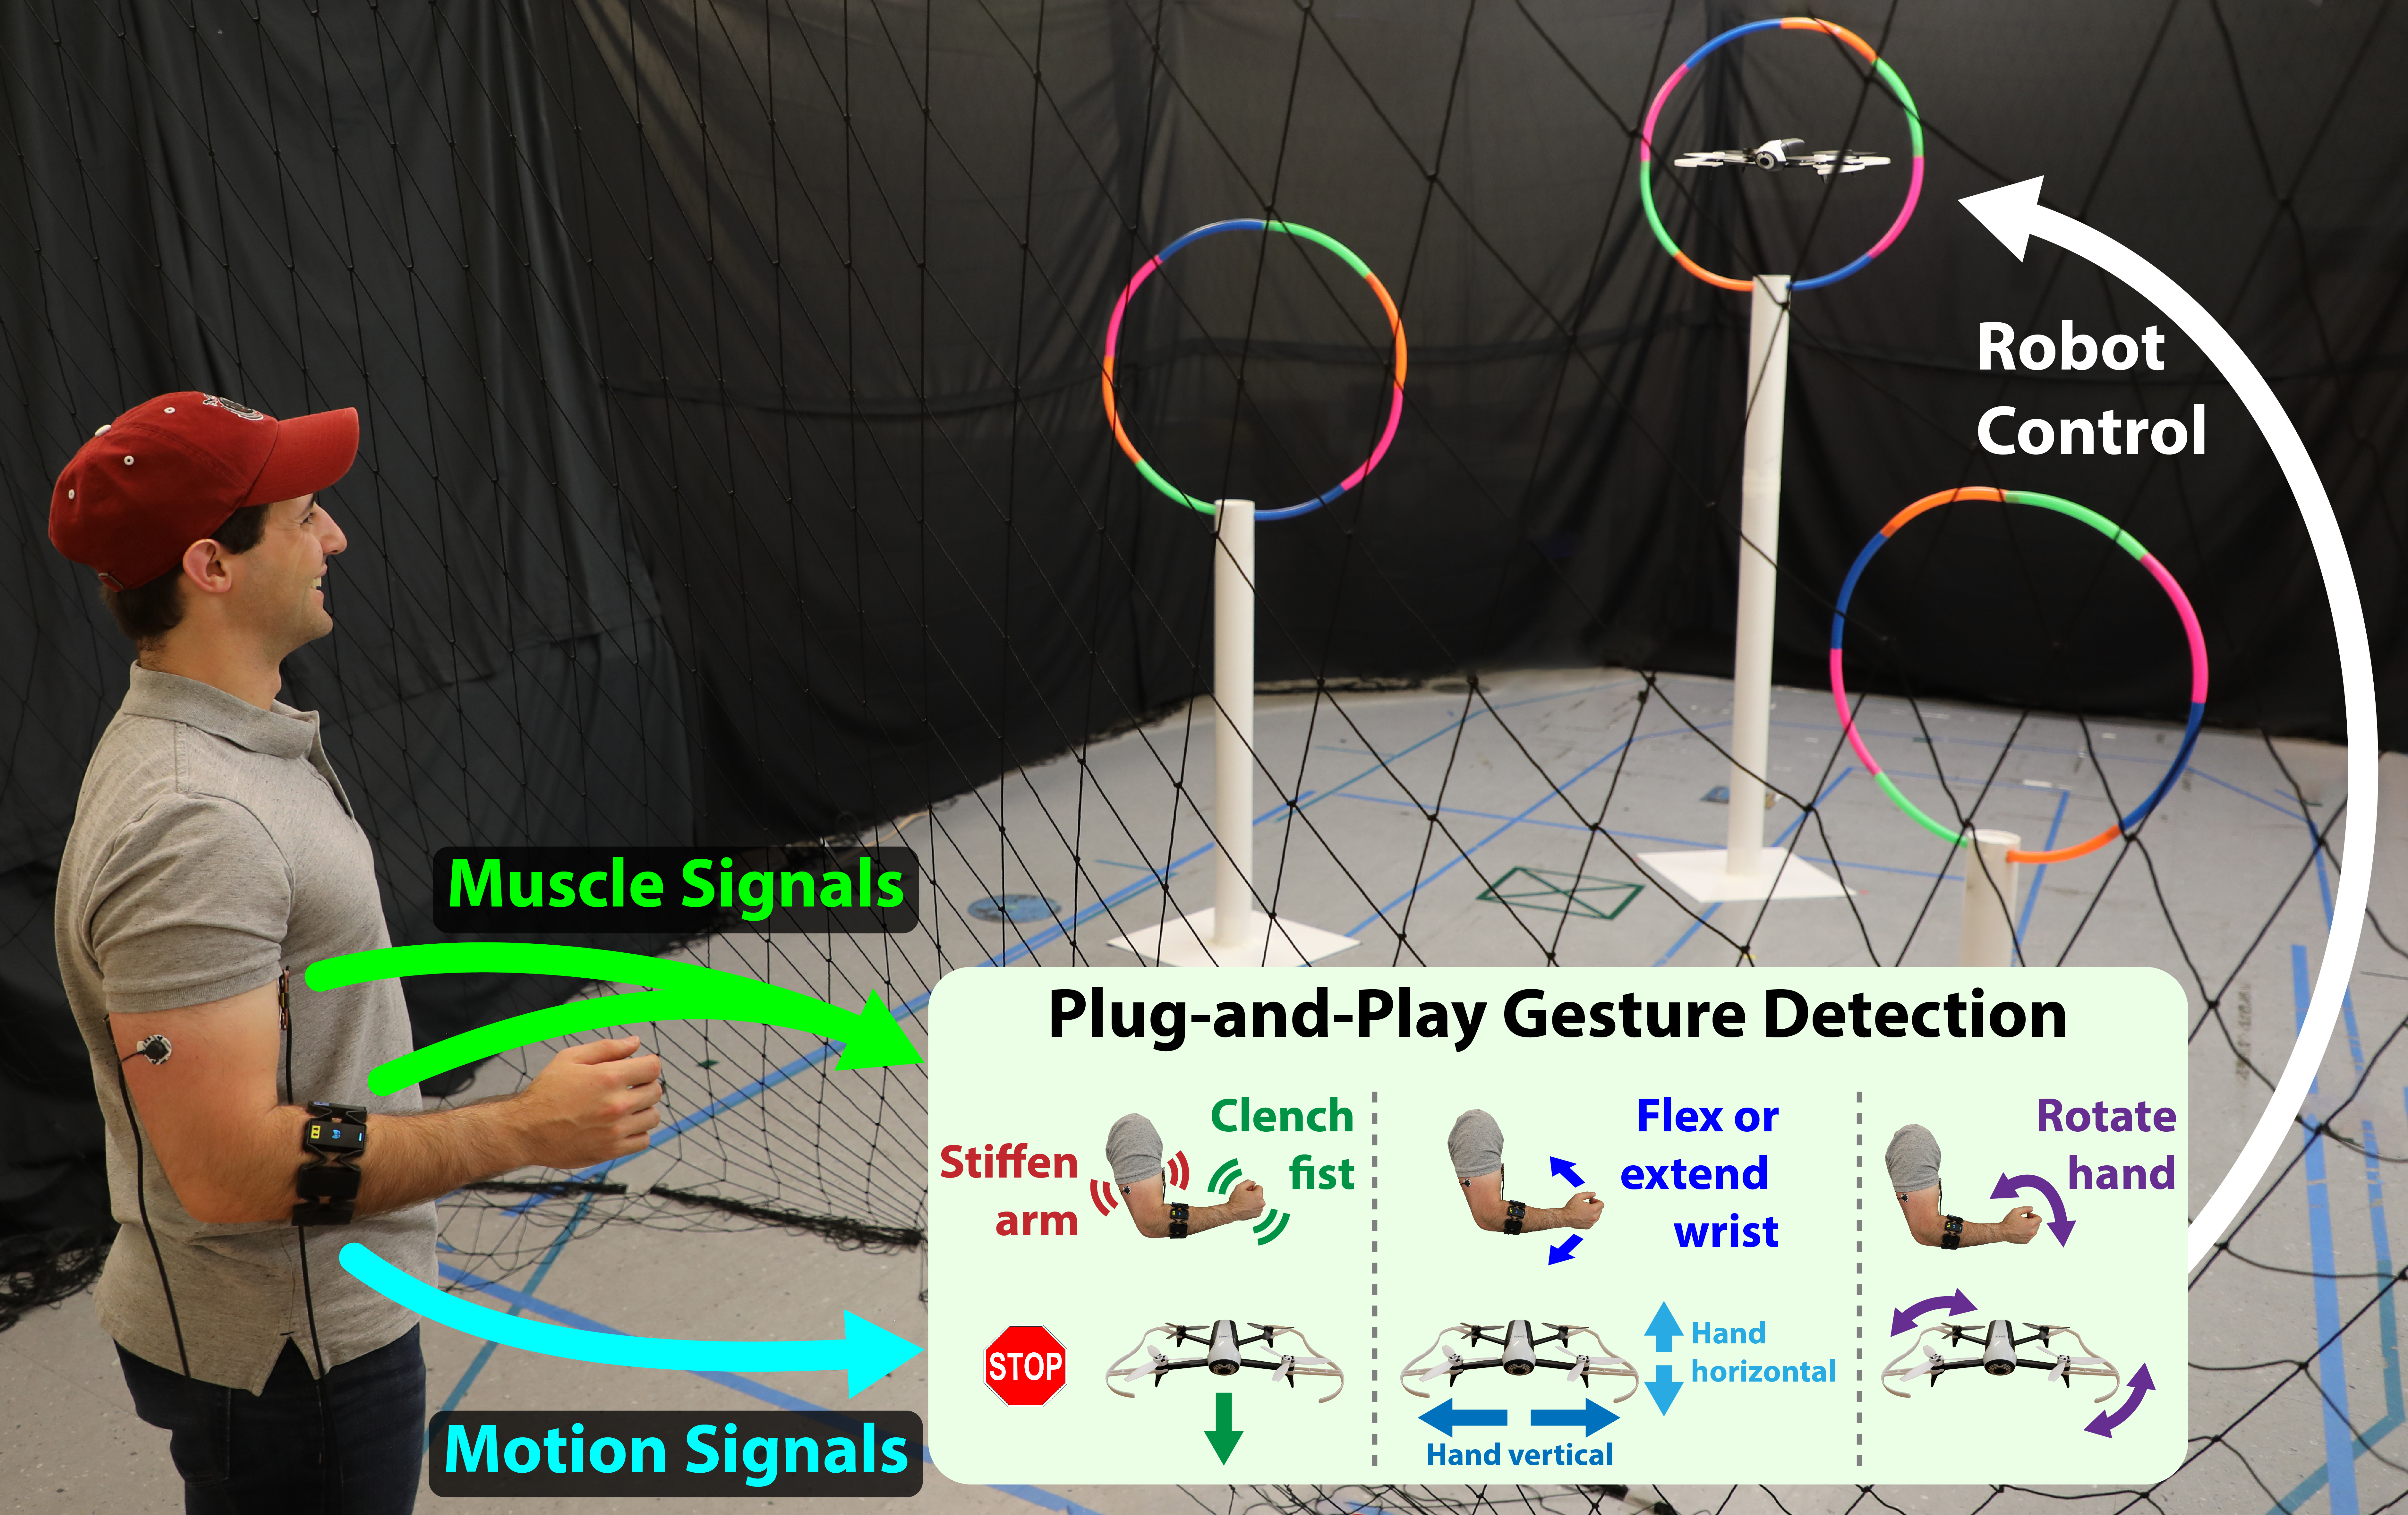 Plug-and-Play Gesture Control Using Muscle and Motion Sensors